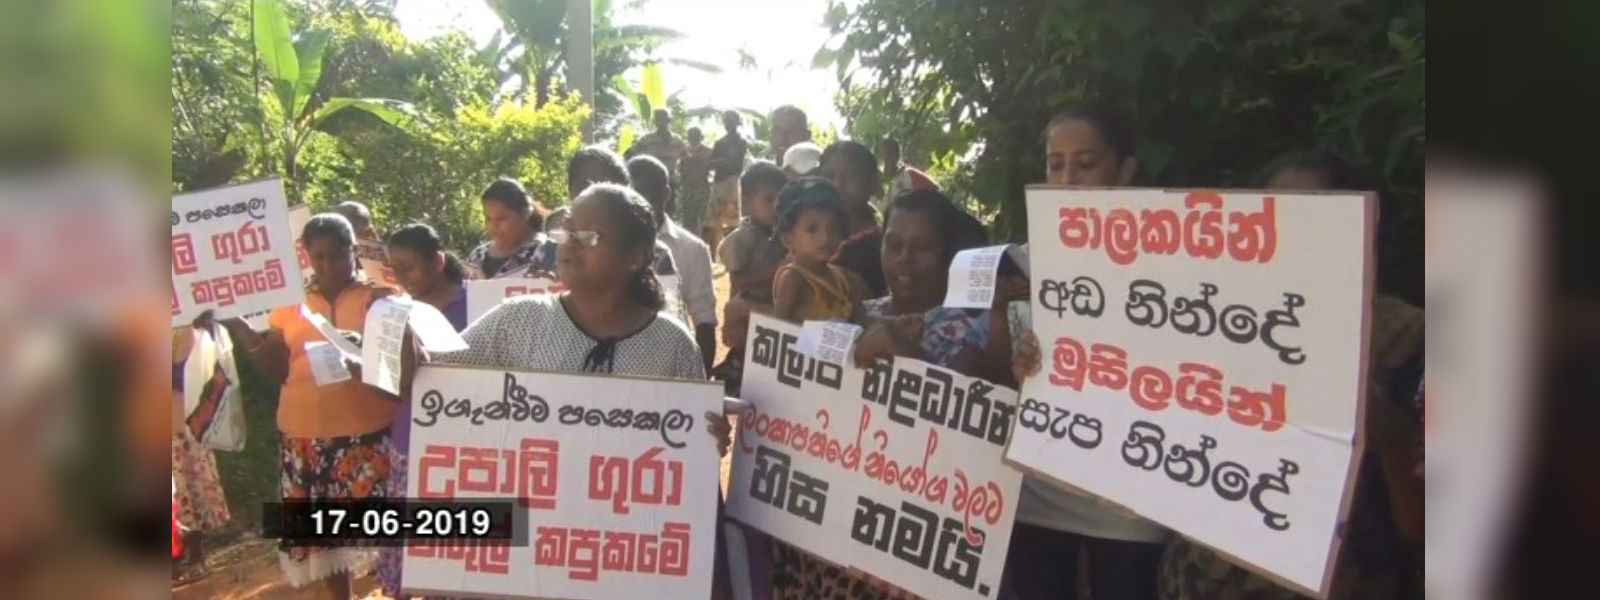 Protest against teacher due to misconduct